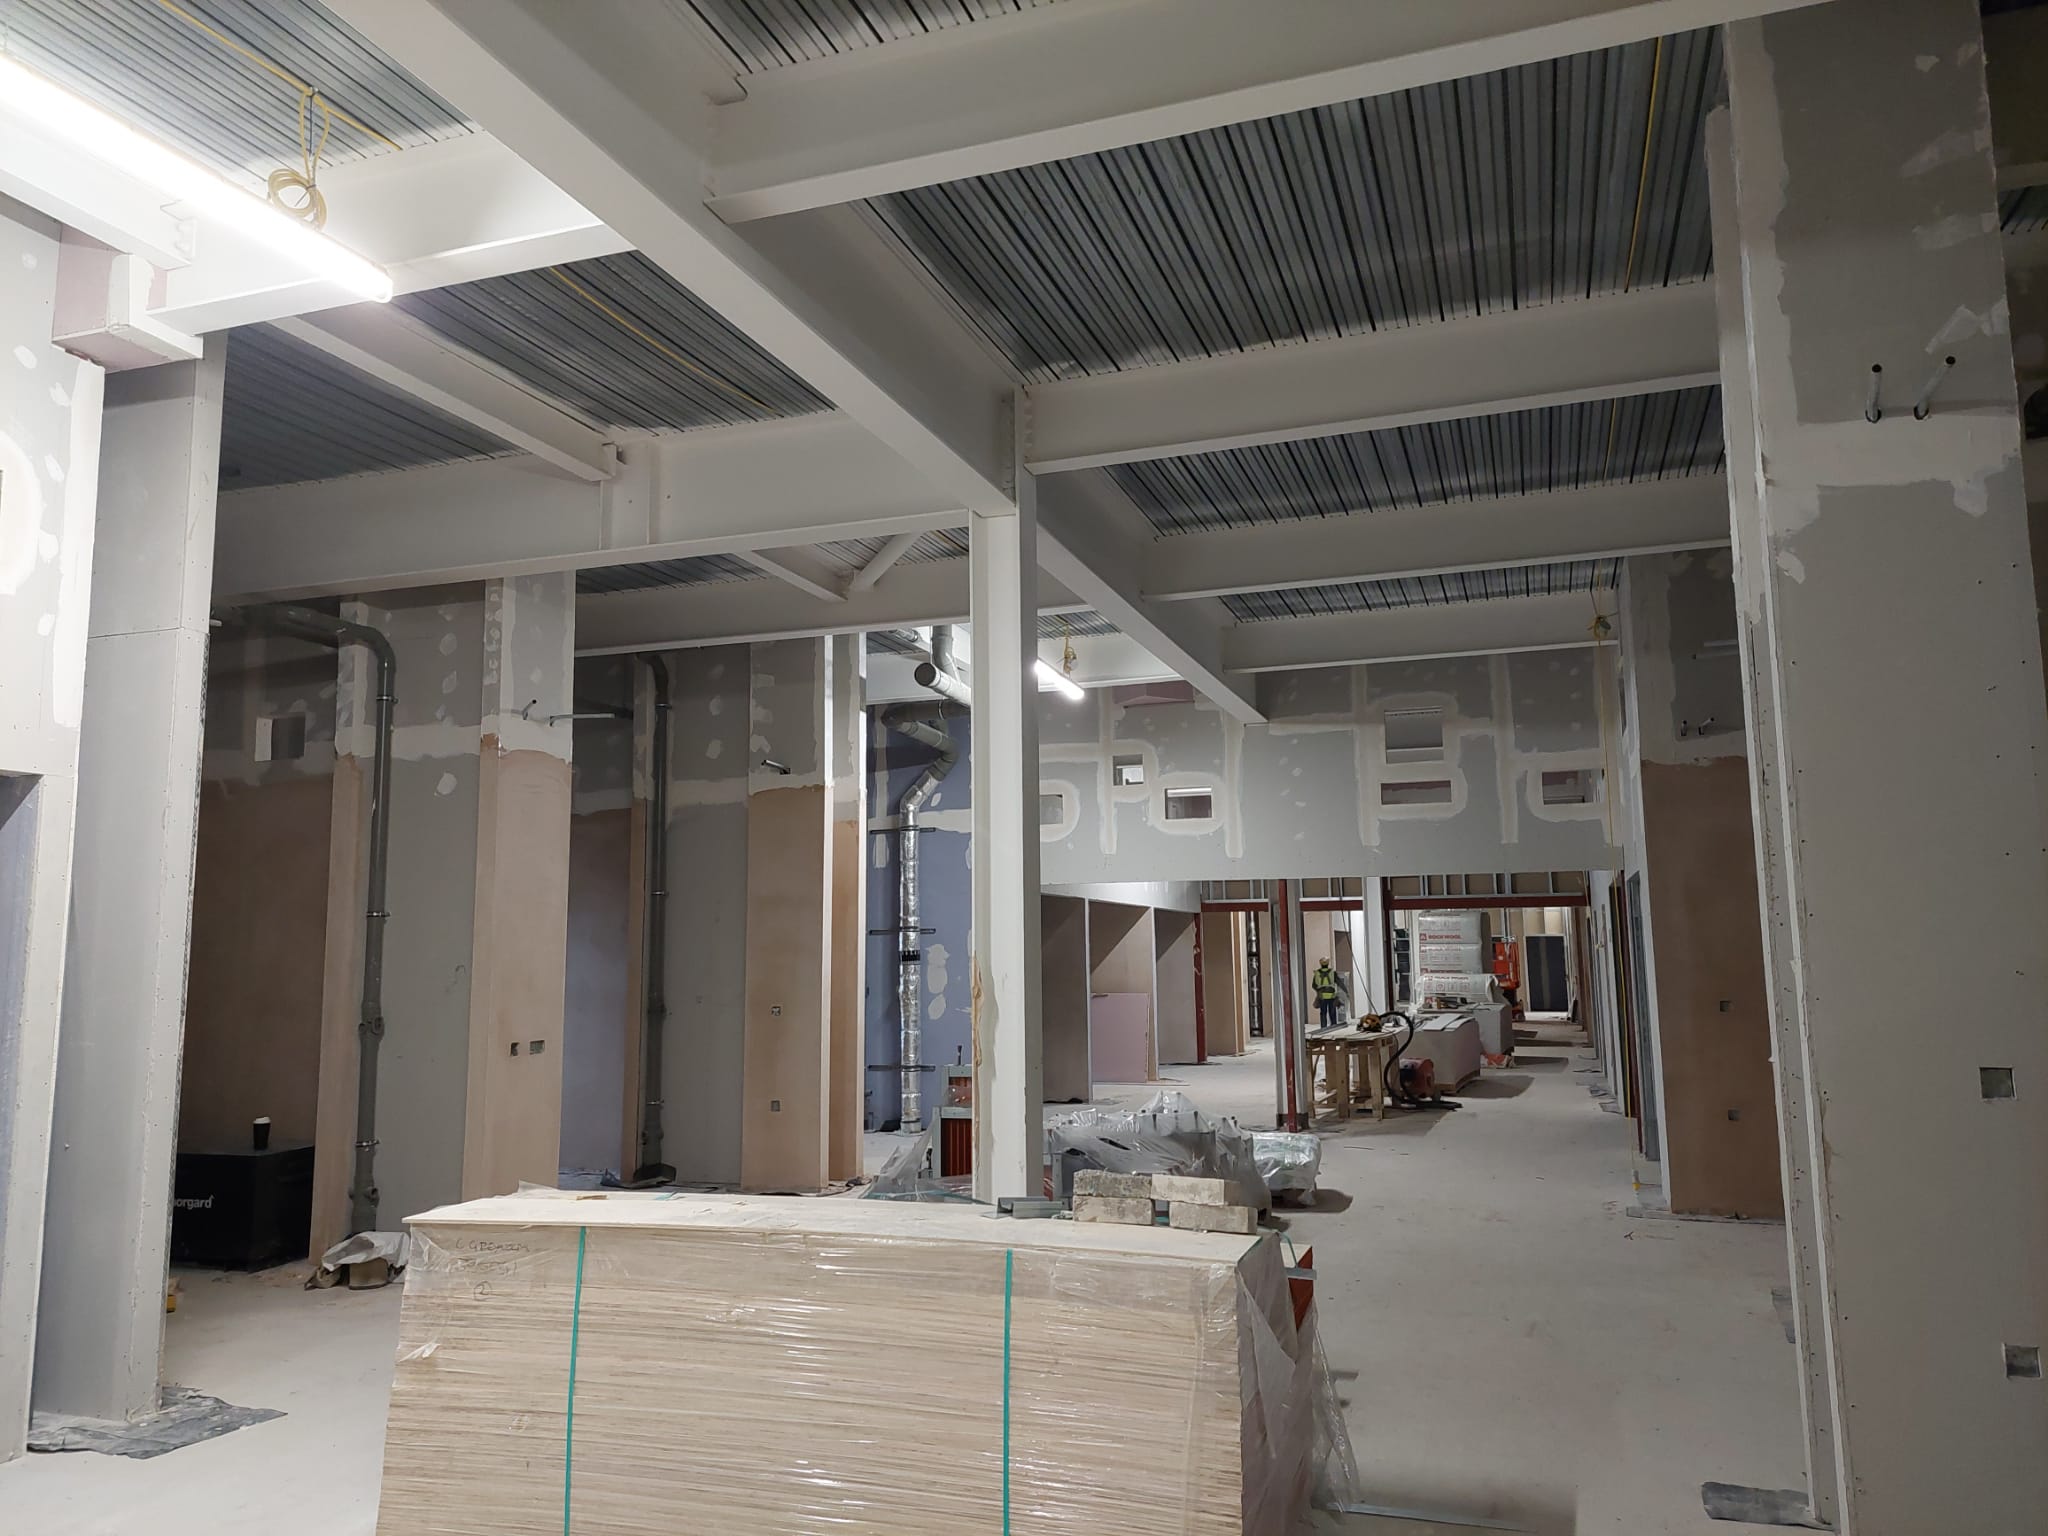 Inside the new build